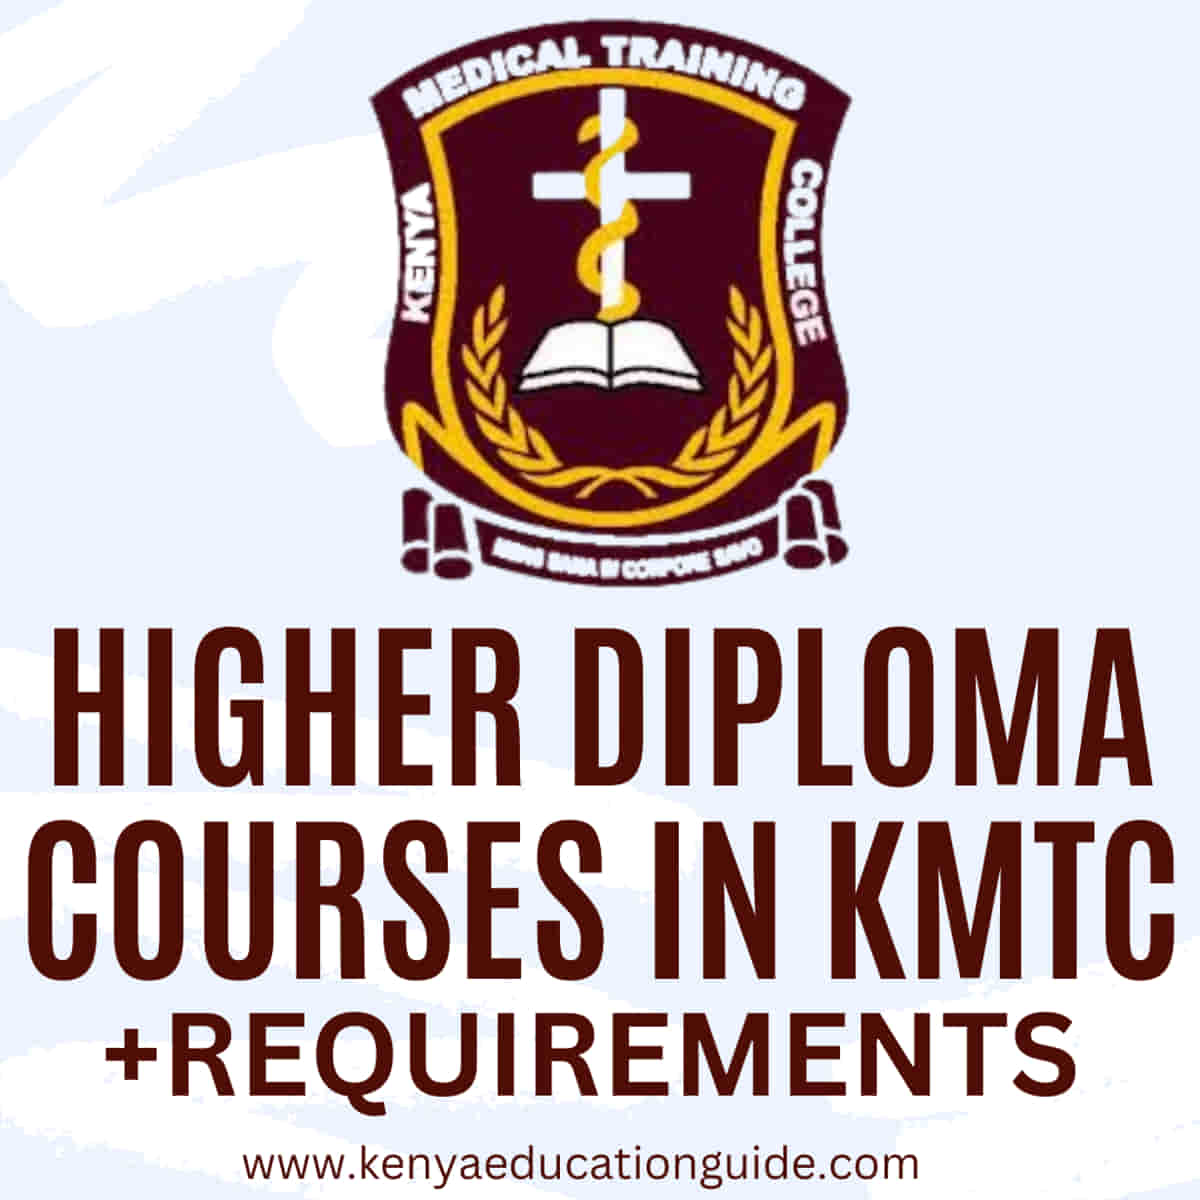 Higher diploma courses in KMTC